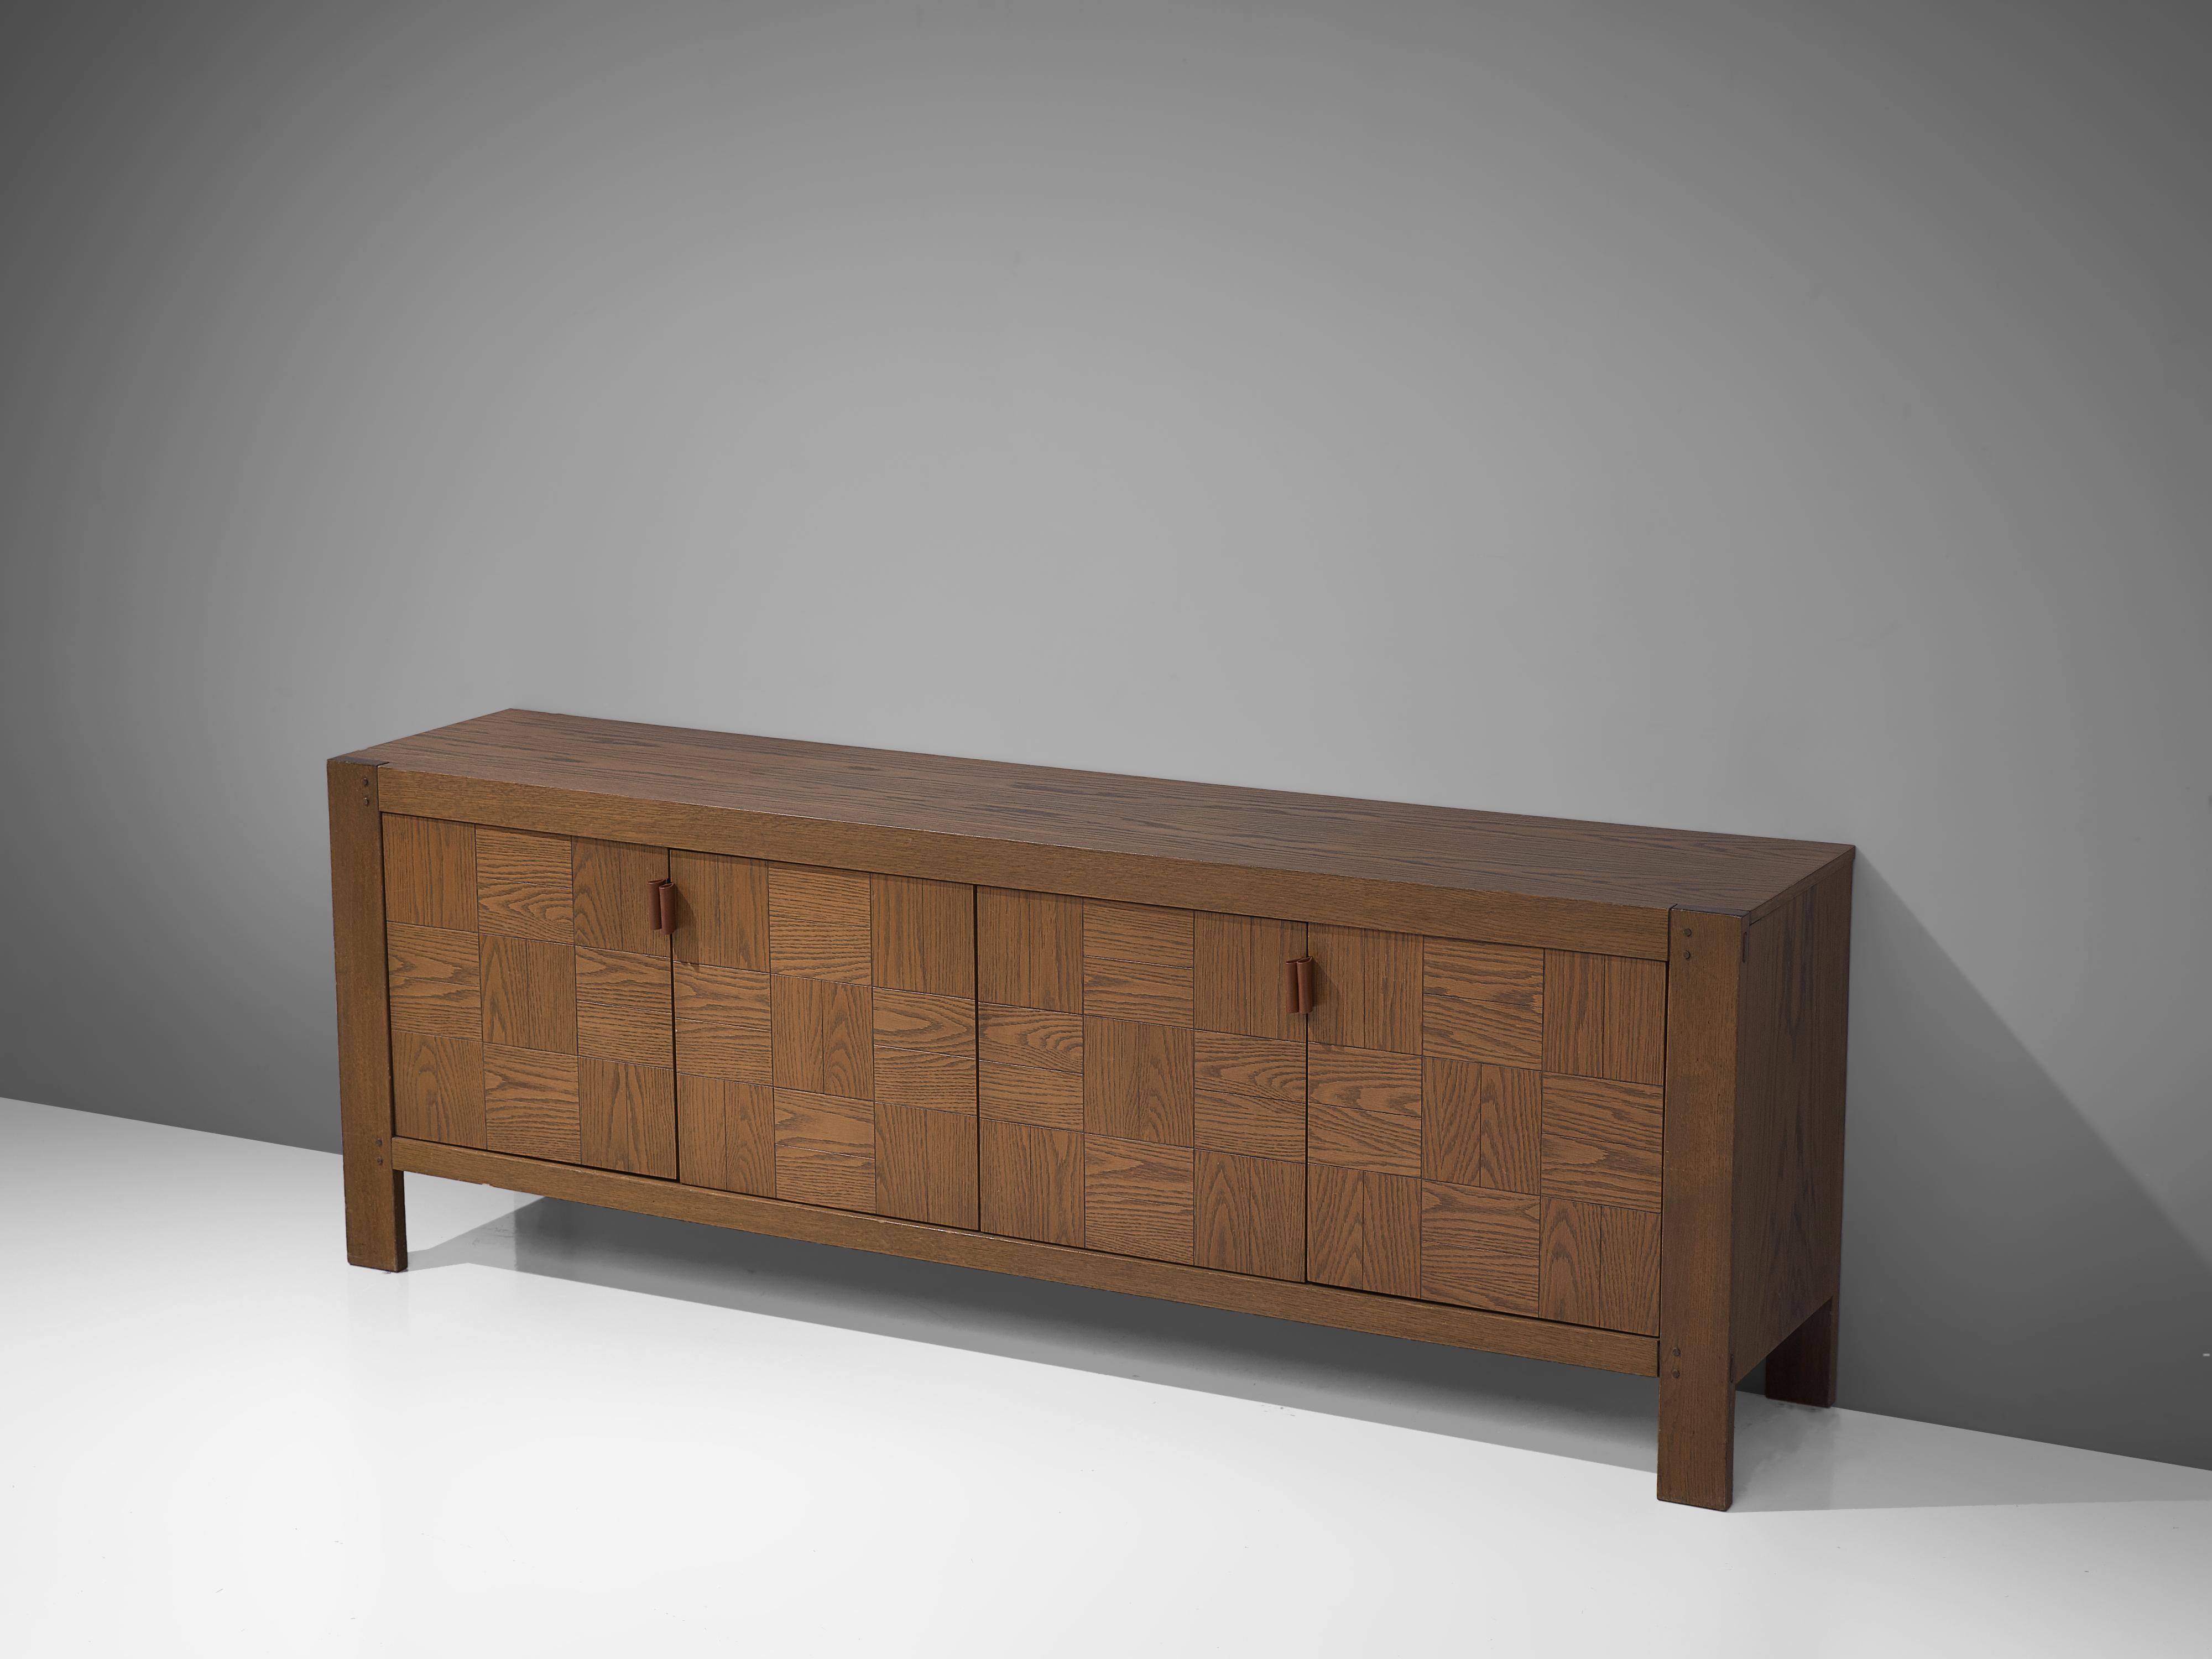 Belgian Cubic Sideboard in Stained Oak with Inlayed Doors